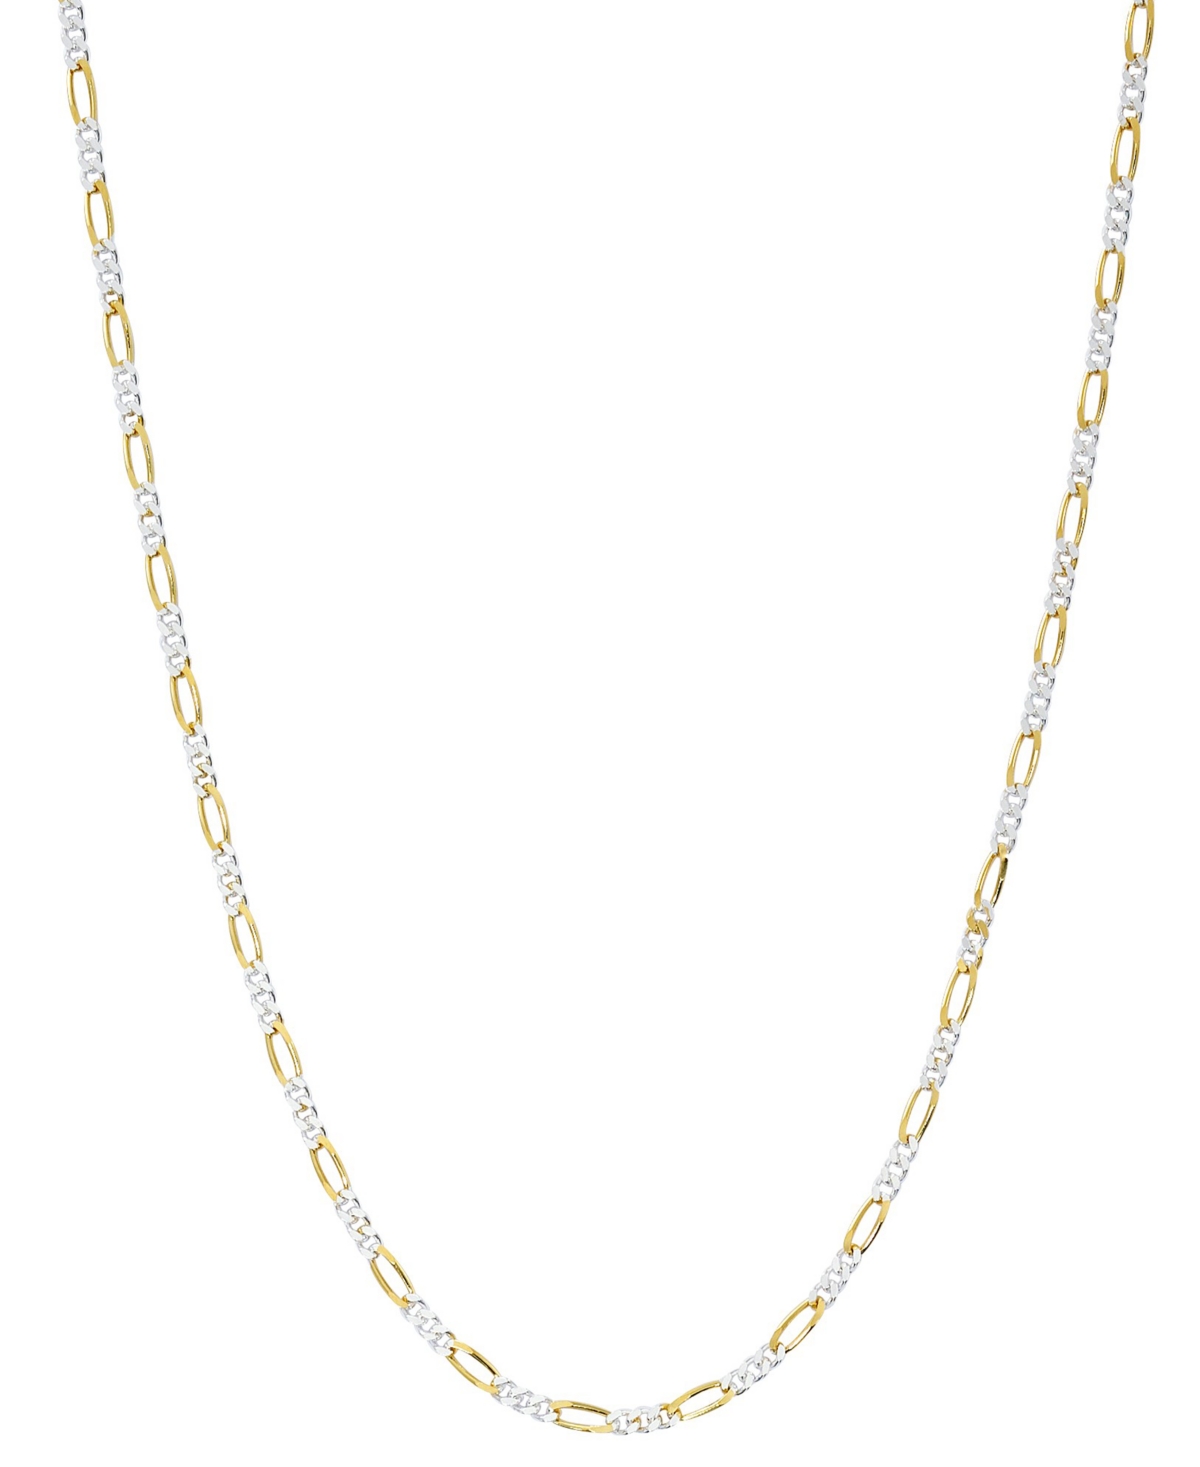 Macy's Giani Bernini Figaro Link 18" Chain Necklace in Sterling Silver & 18k Gold-Plated, Created for Macy's - Two-Tone